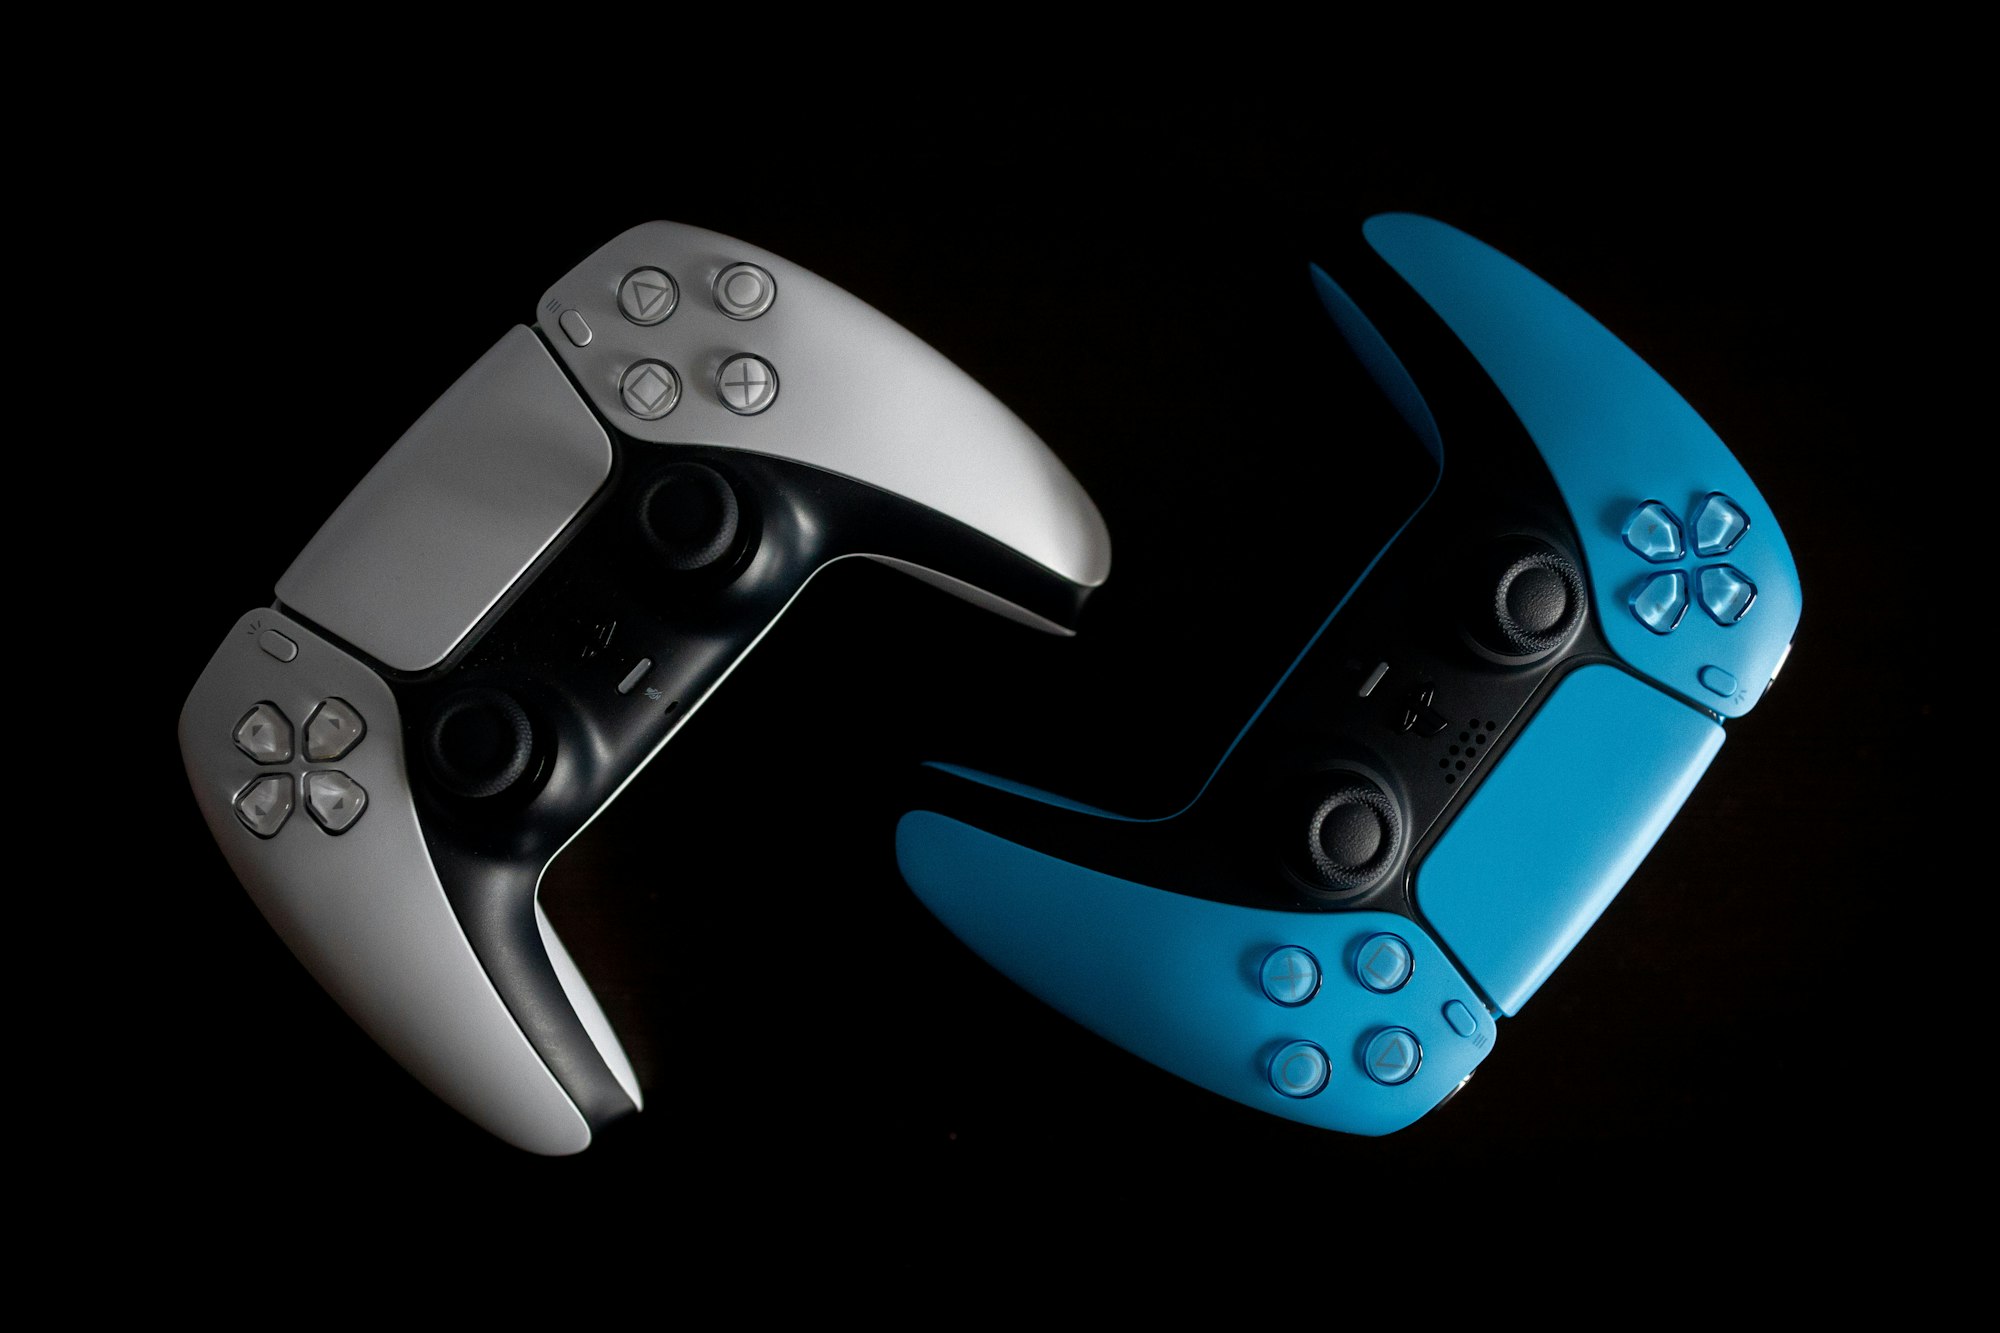 Two PS5 controllers, one white, one teal, on an artful black background.